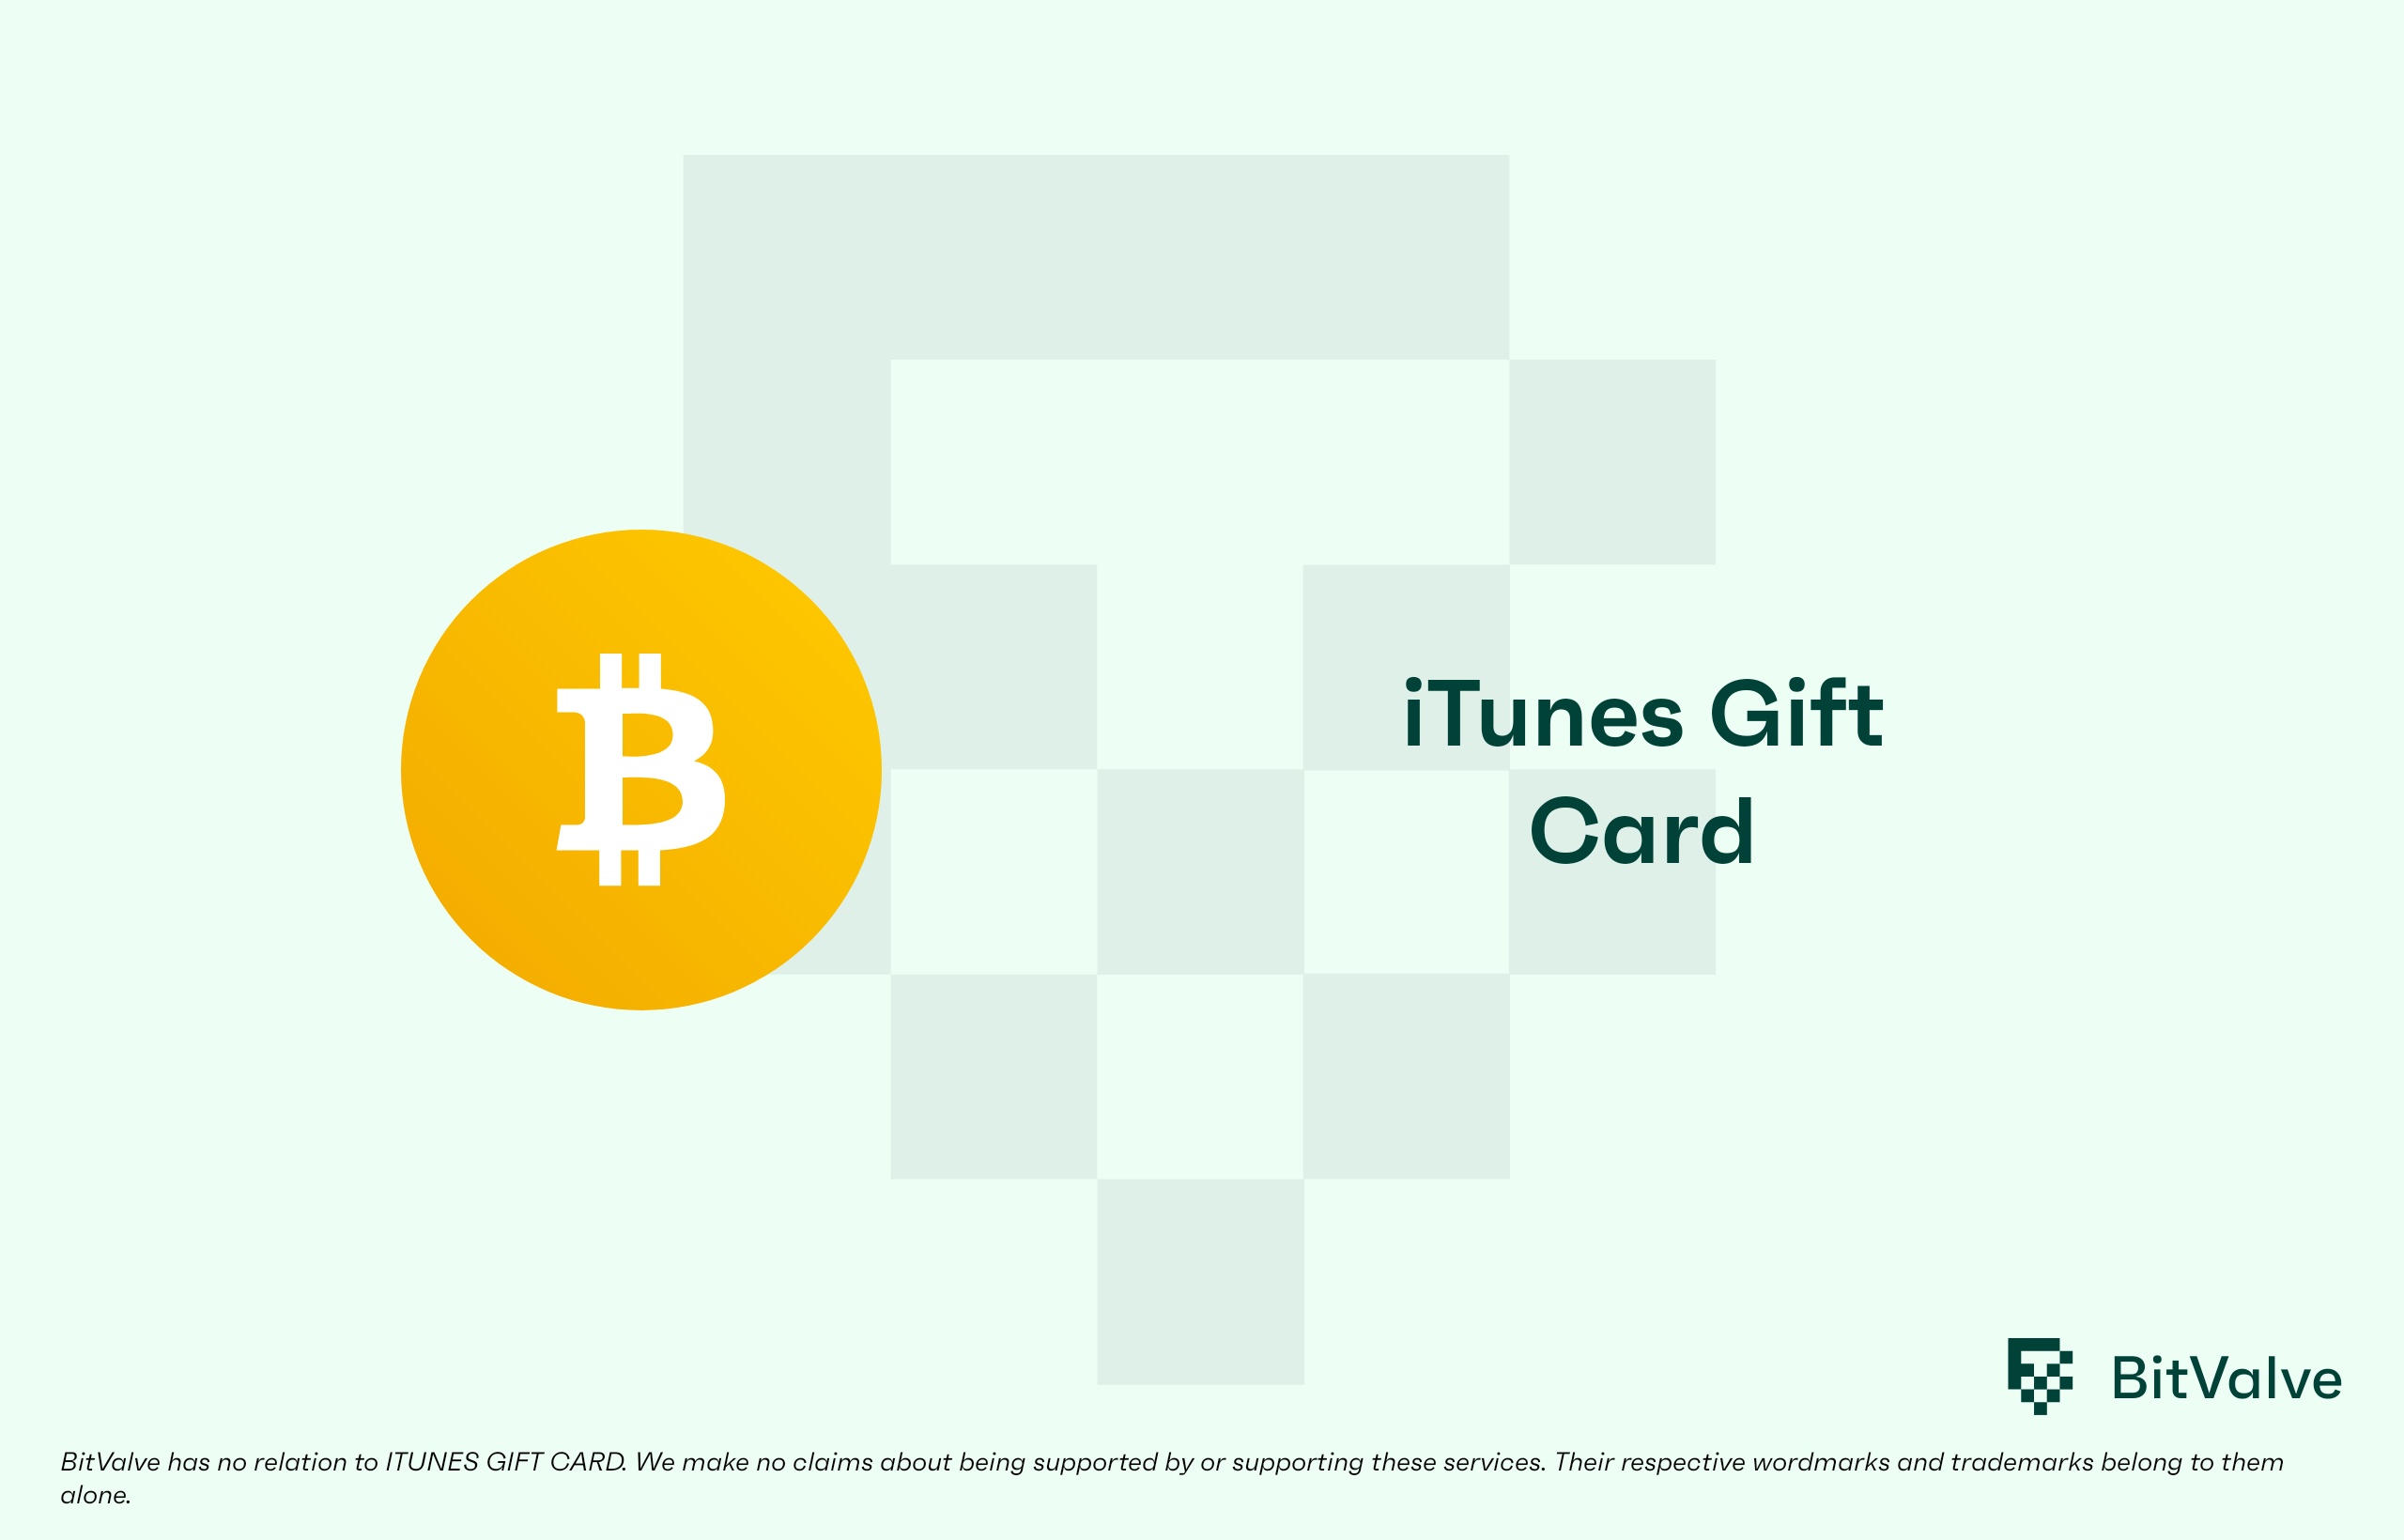 iTunes 100 USD Gift Card